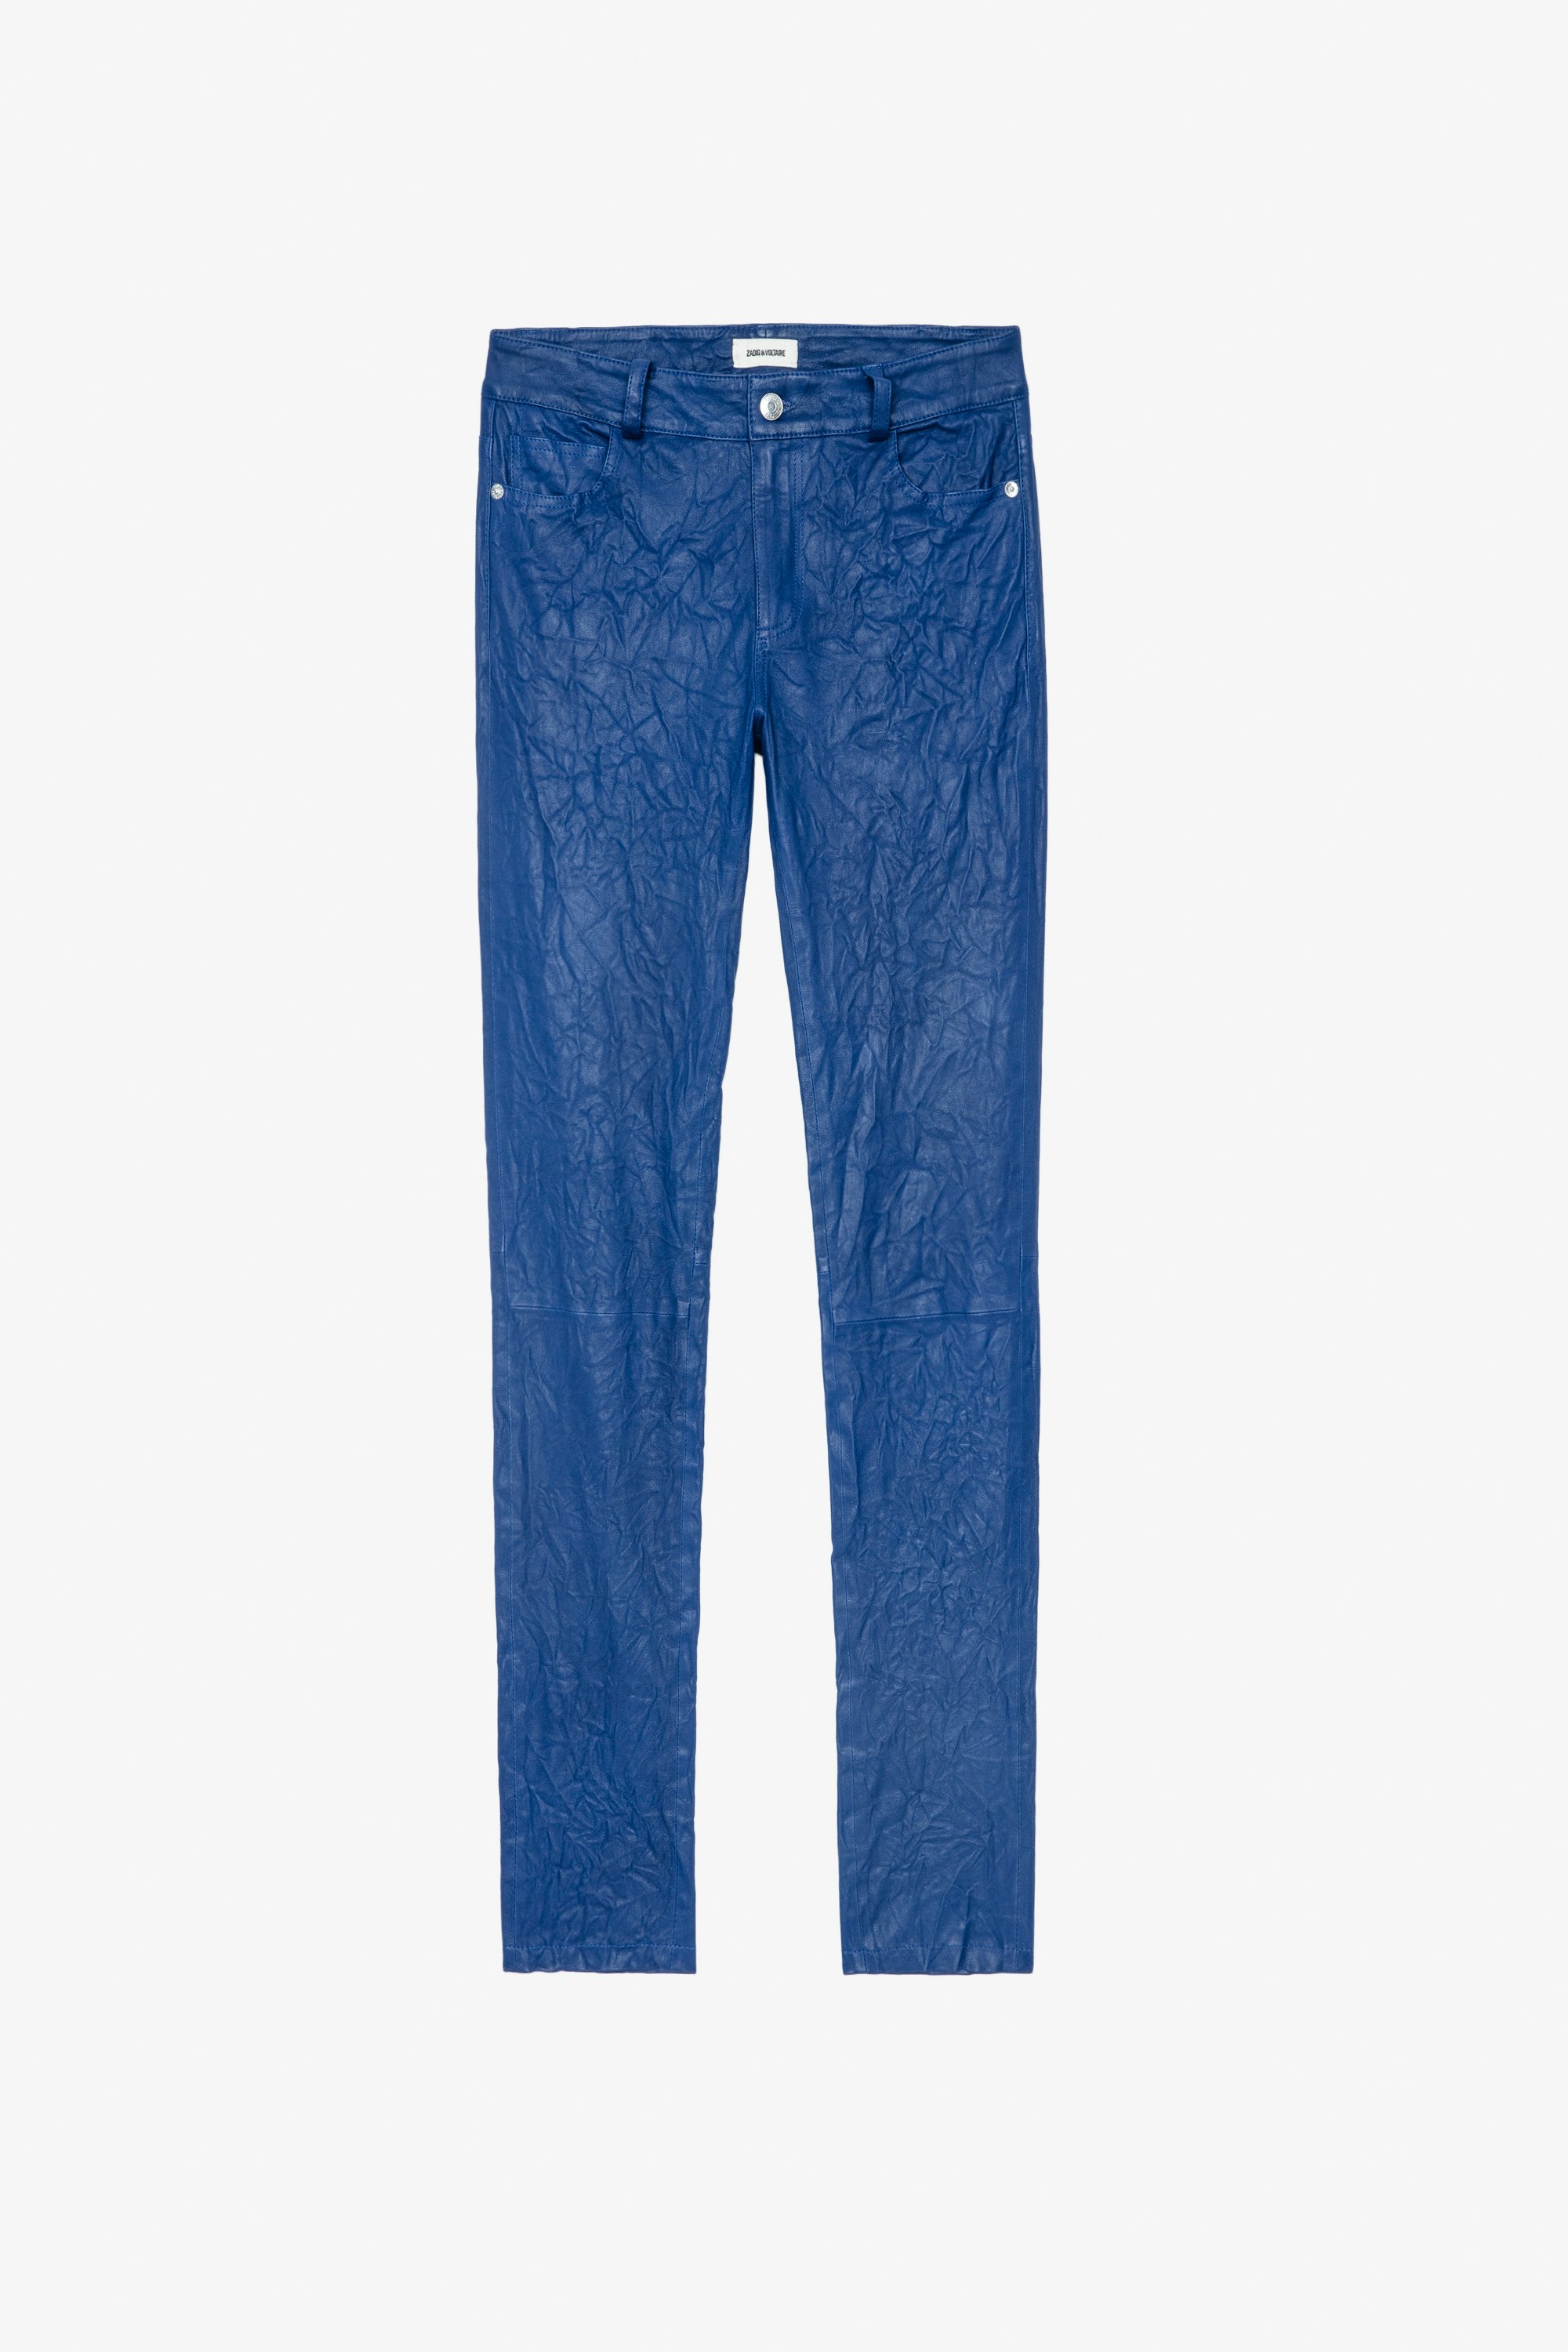 Phlame Creased Leather Trousers Women’s blue creased leather trousers